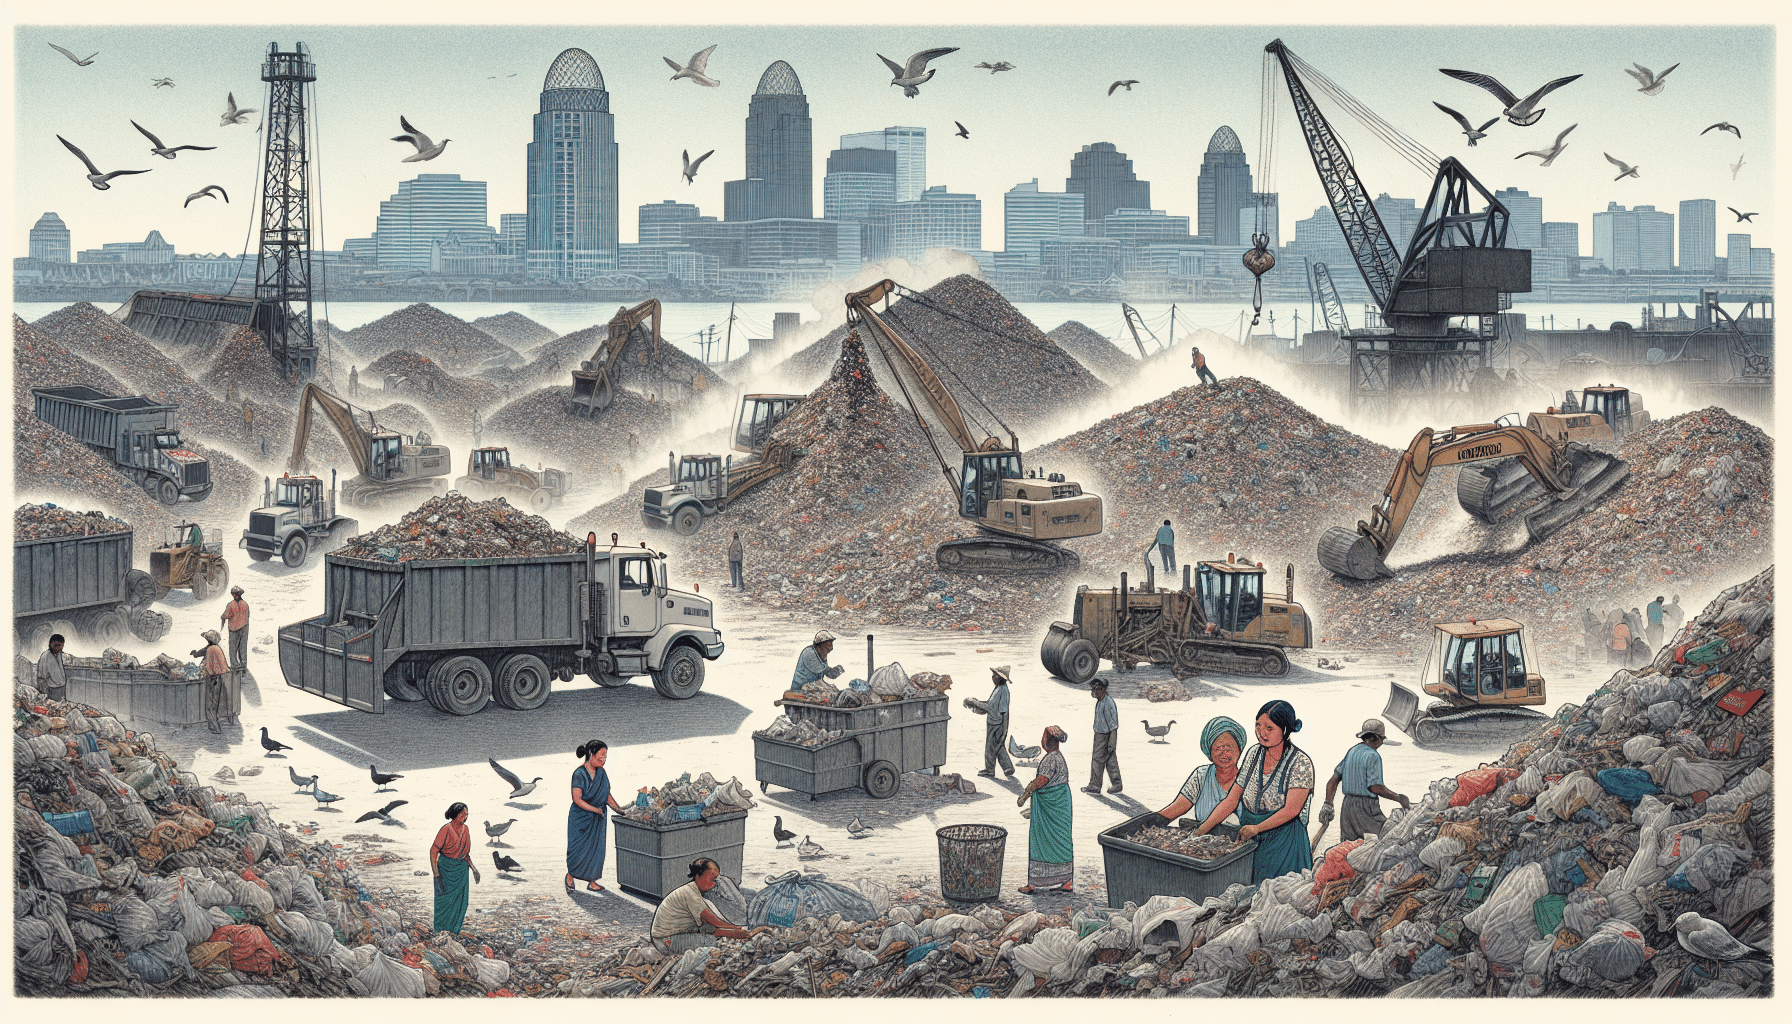 Illustration of a landfill site in Louisville, KY